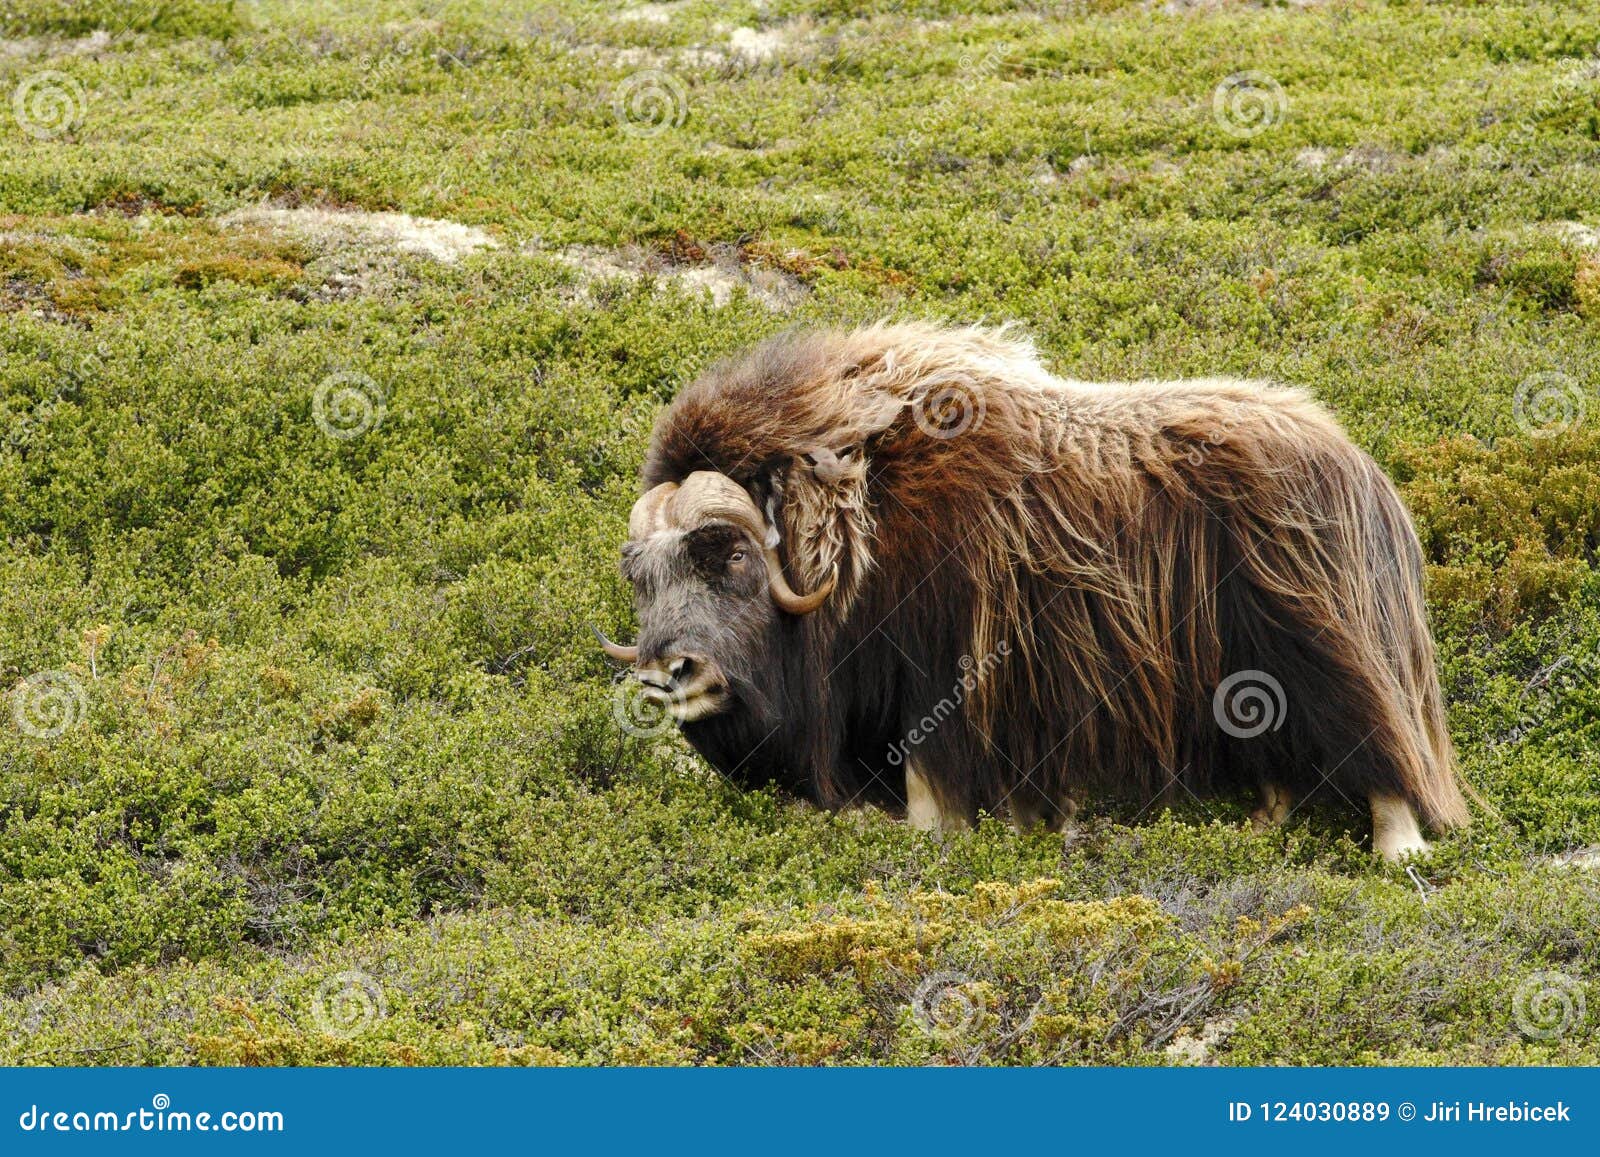 Muskox Ovibos Moschatus. Musk Ox Bull Peacefully Standing on Grass in  Greenland Stock Image - Image of brown, background: 124030889